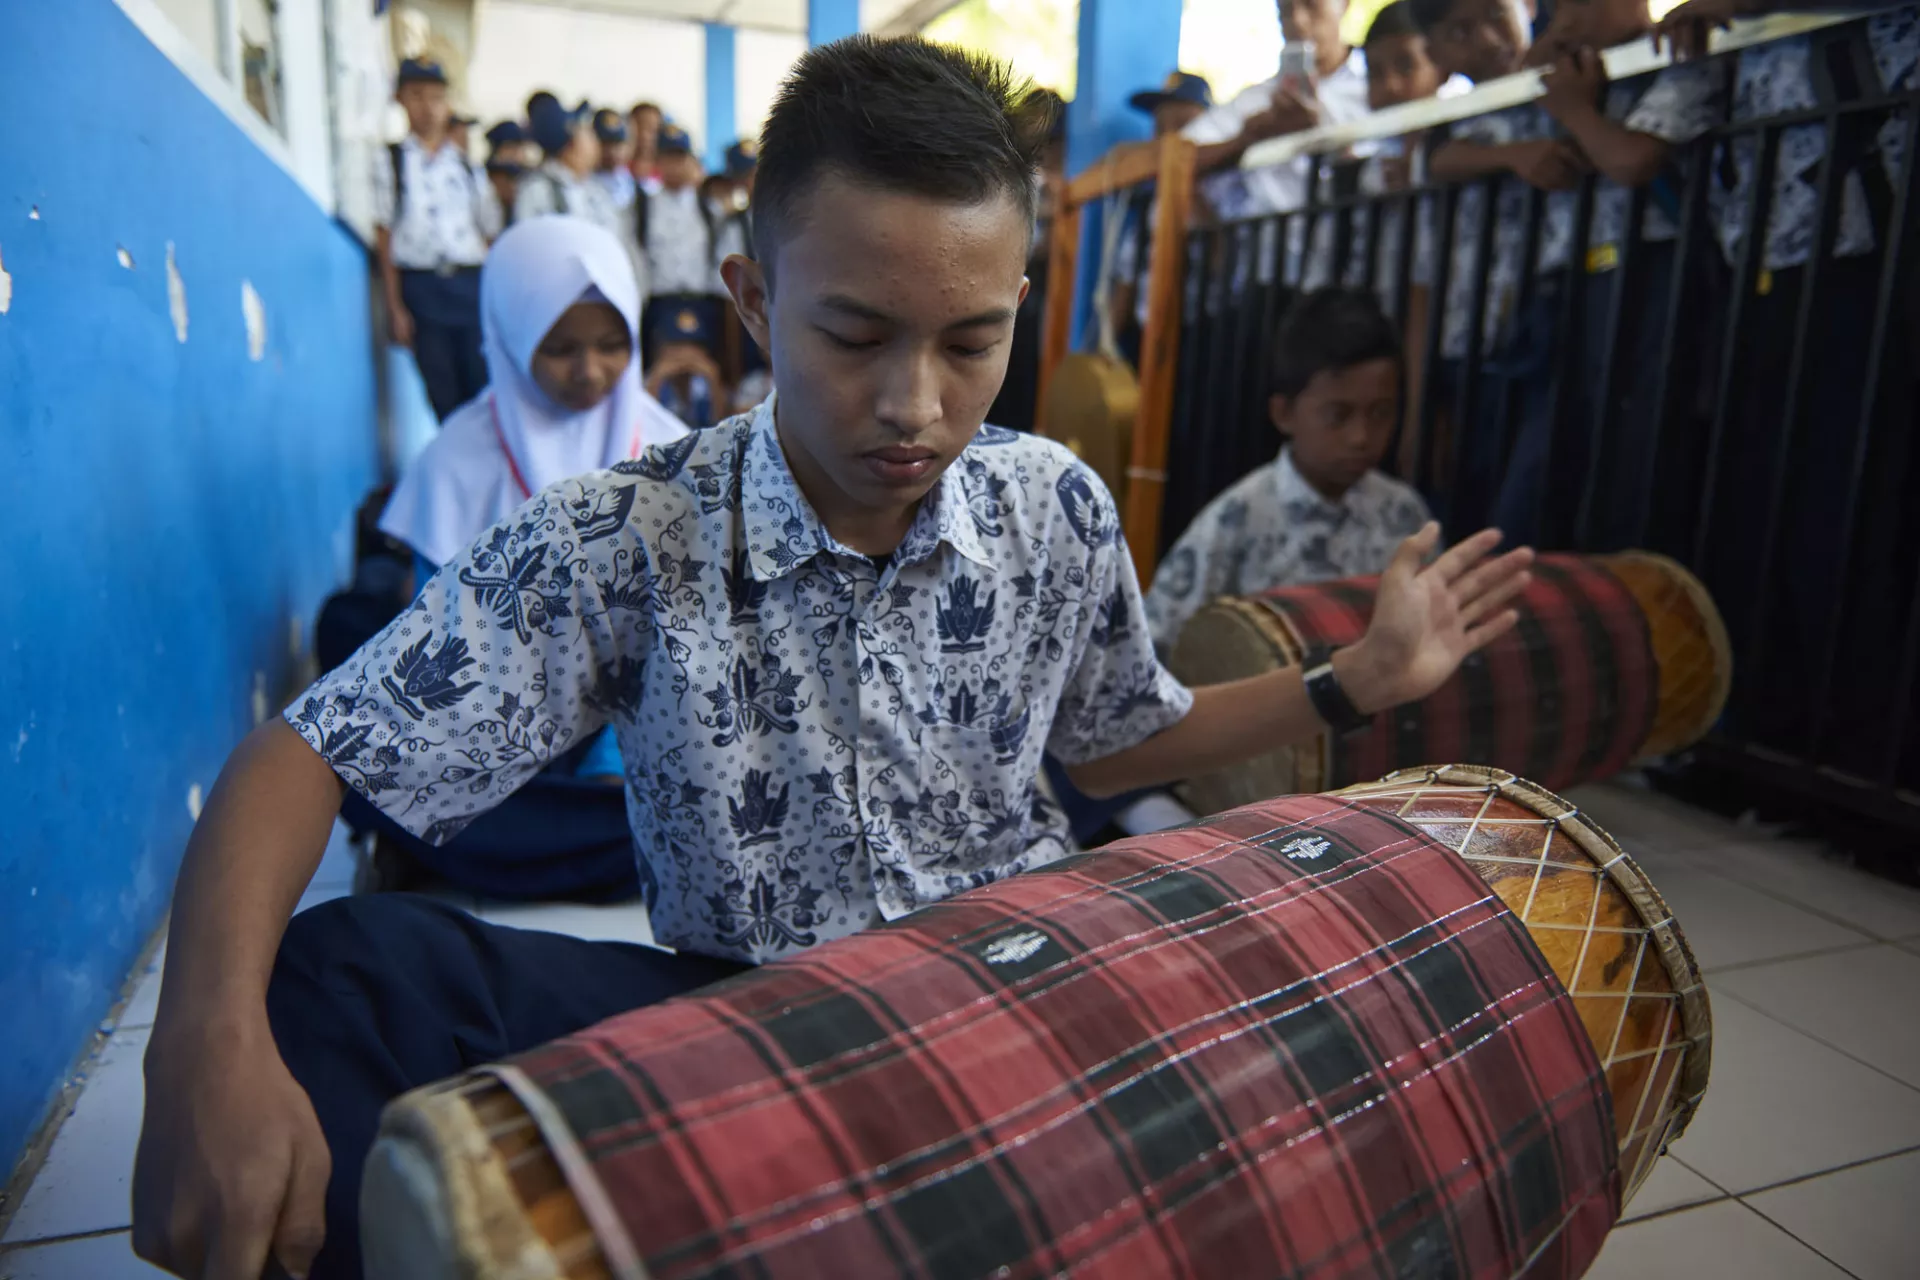 A young boy playing an instrument in school.